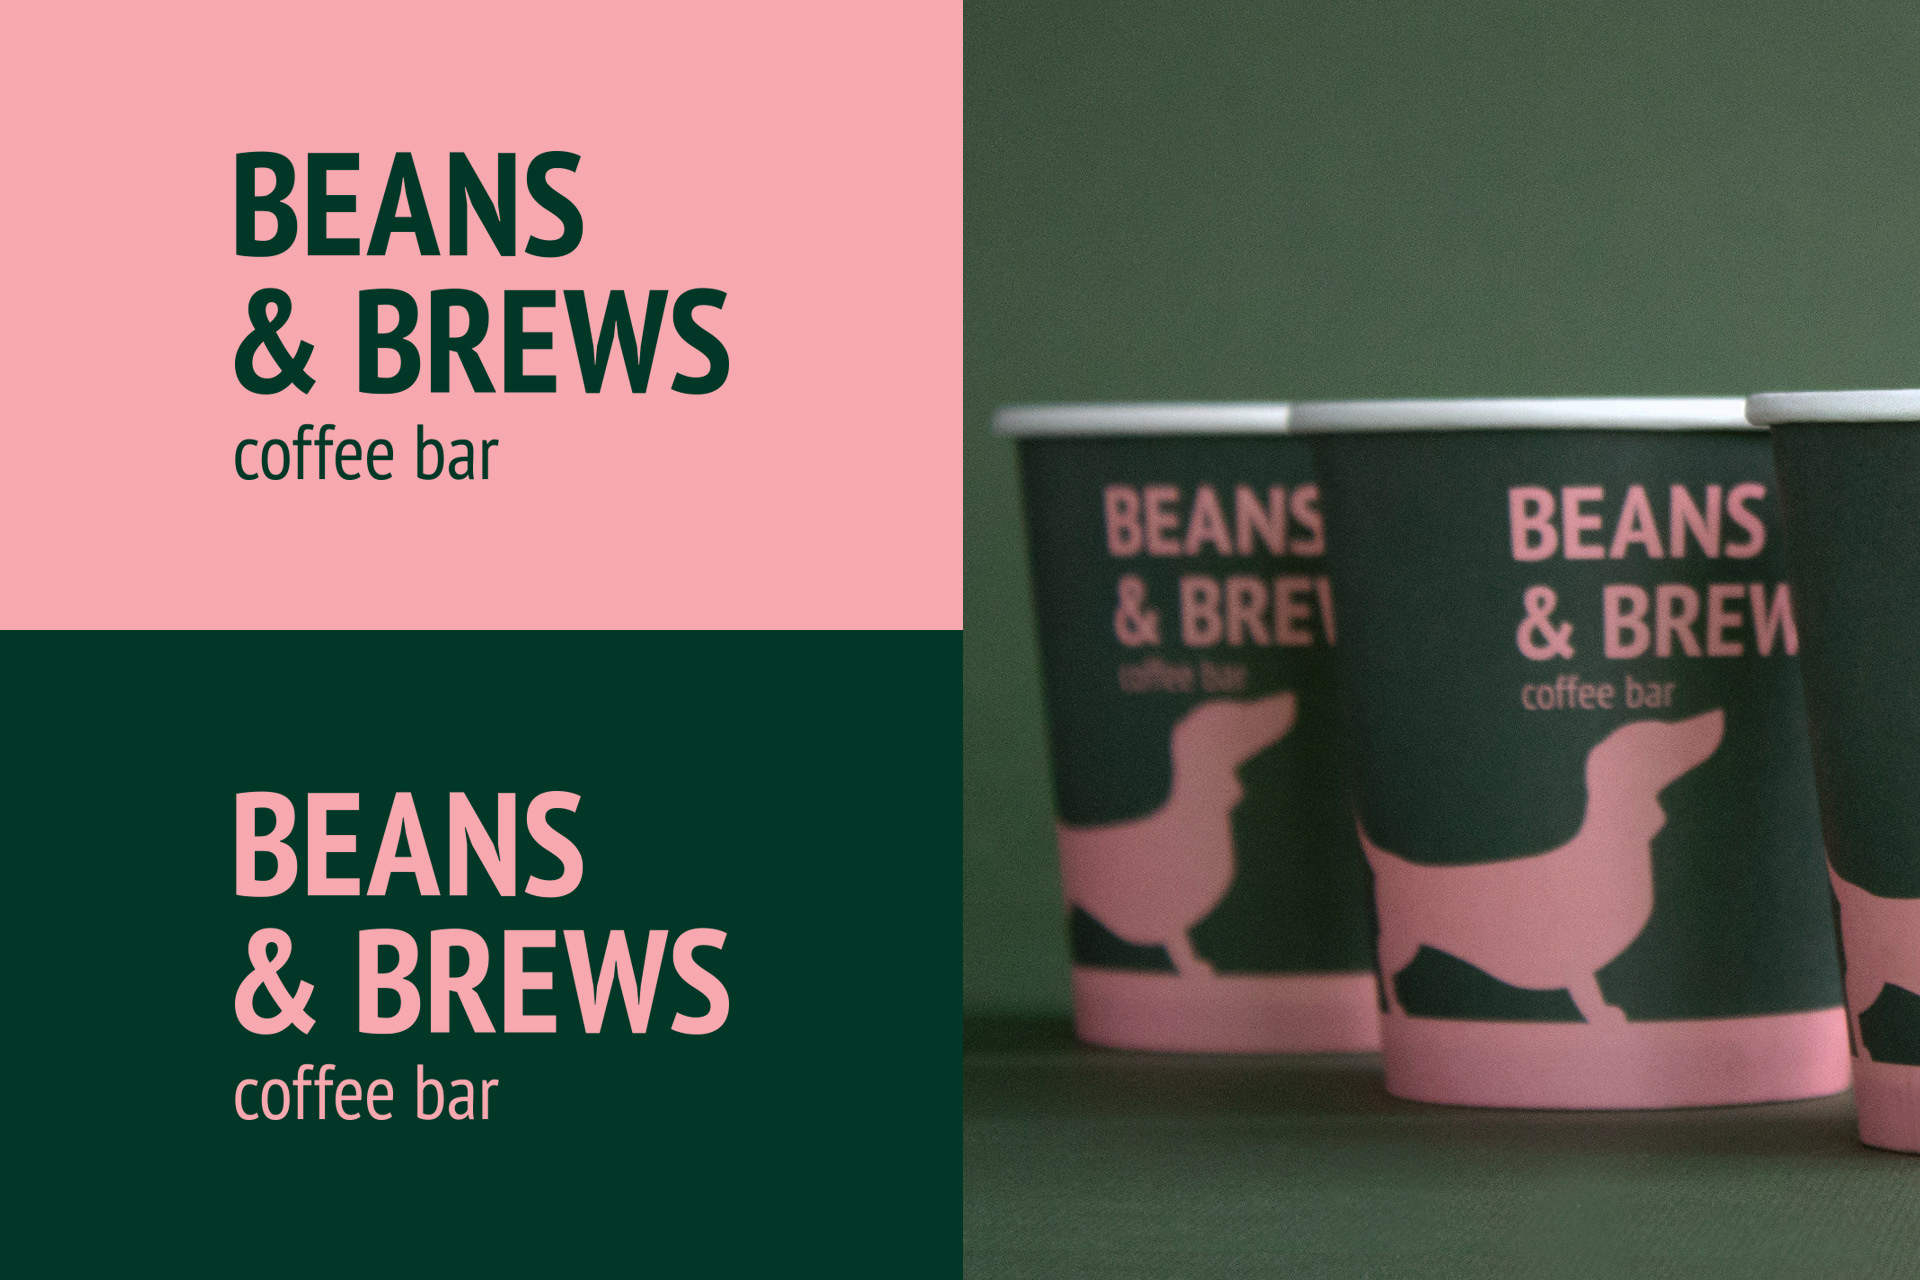 Beans & Brews Coffee Bar Branding By Canape Agency